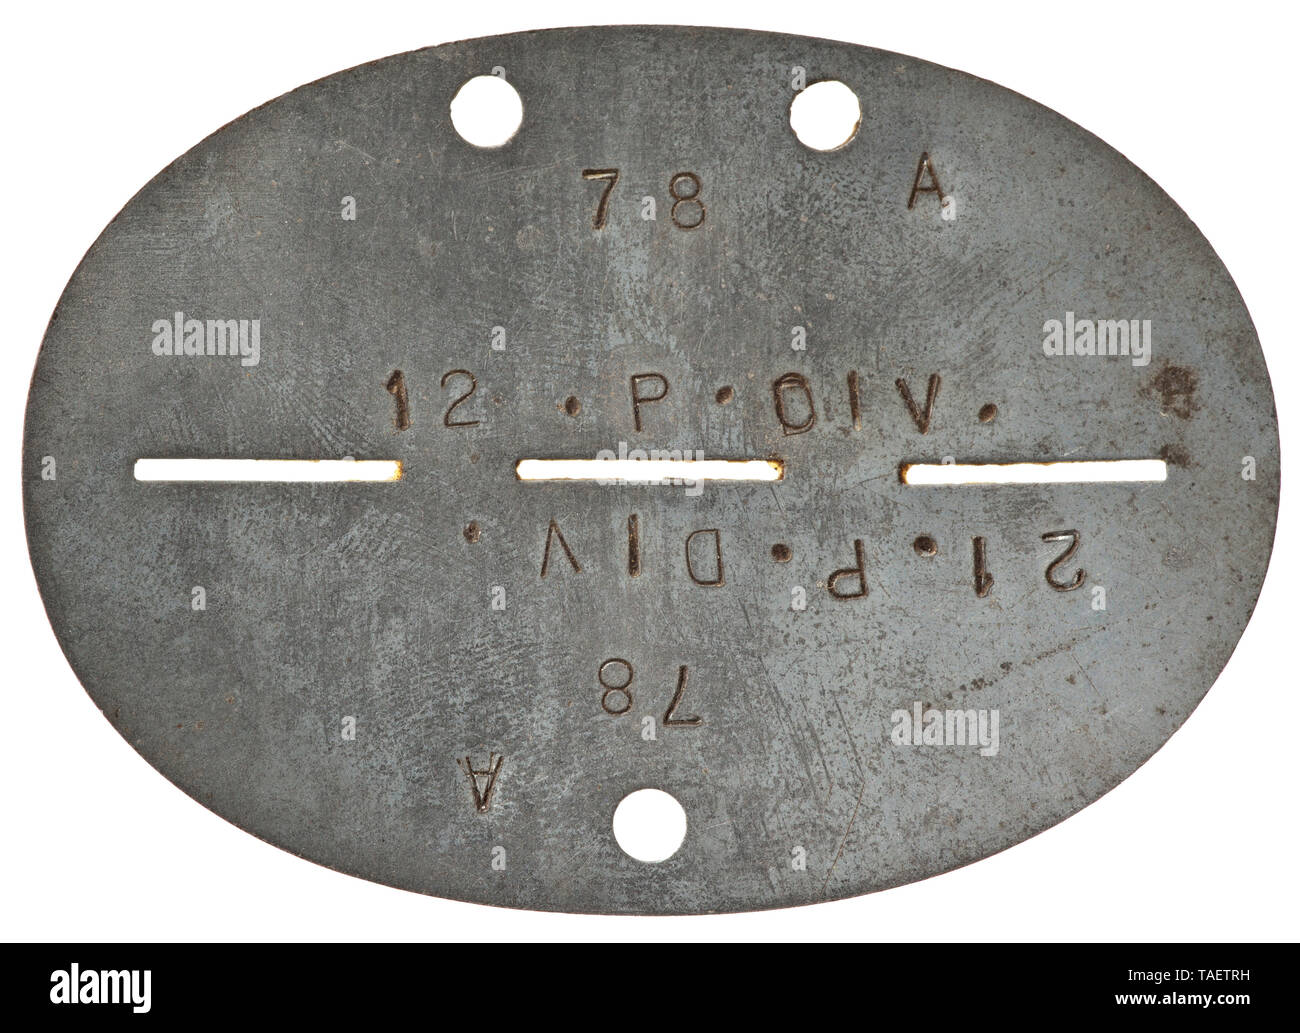 An identification tag for 21st Panzer division Eisenblech (leicht migriert) mit vs. Bezeichnung 'A 78 21.P.Div.', rs. ohne Markung. historic, historical, 20th century, Editorial-Use-Only Stock Photo